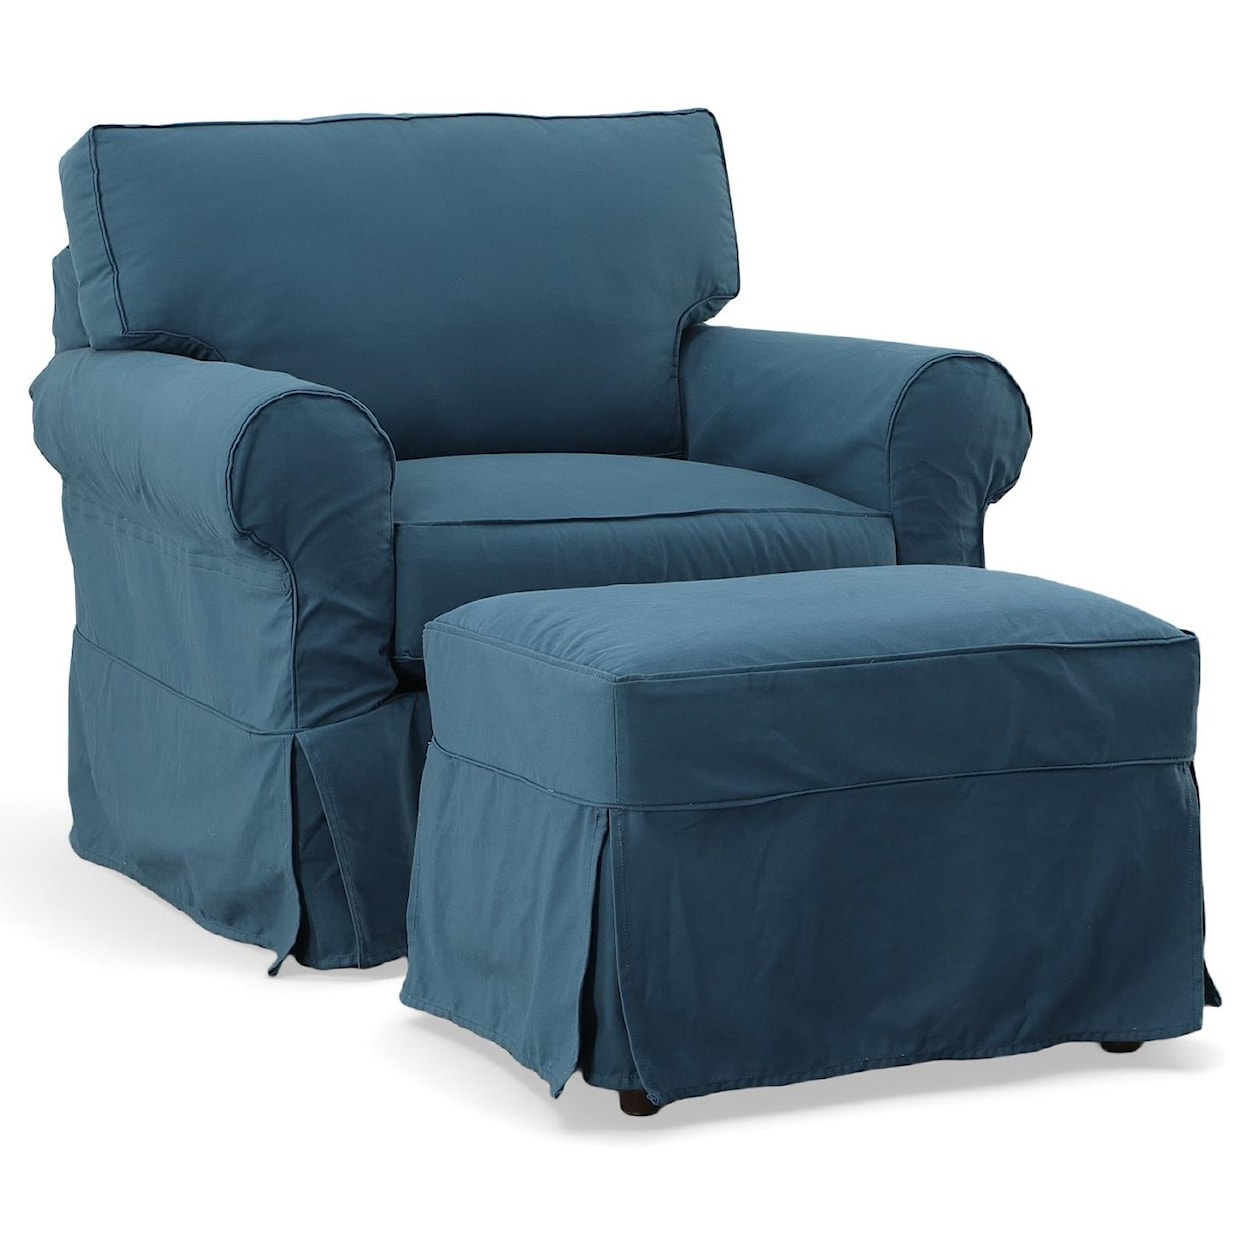 Stone & Leigh Furniture Natalie Slipcover Chair and Ottoman